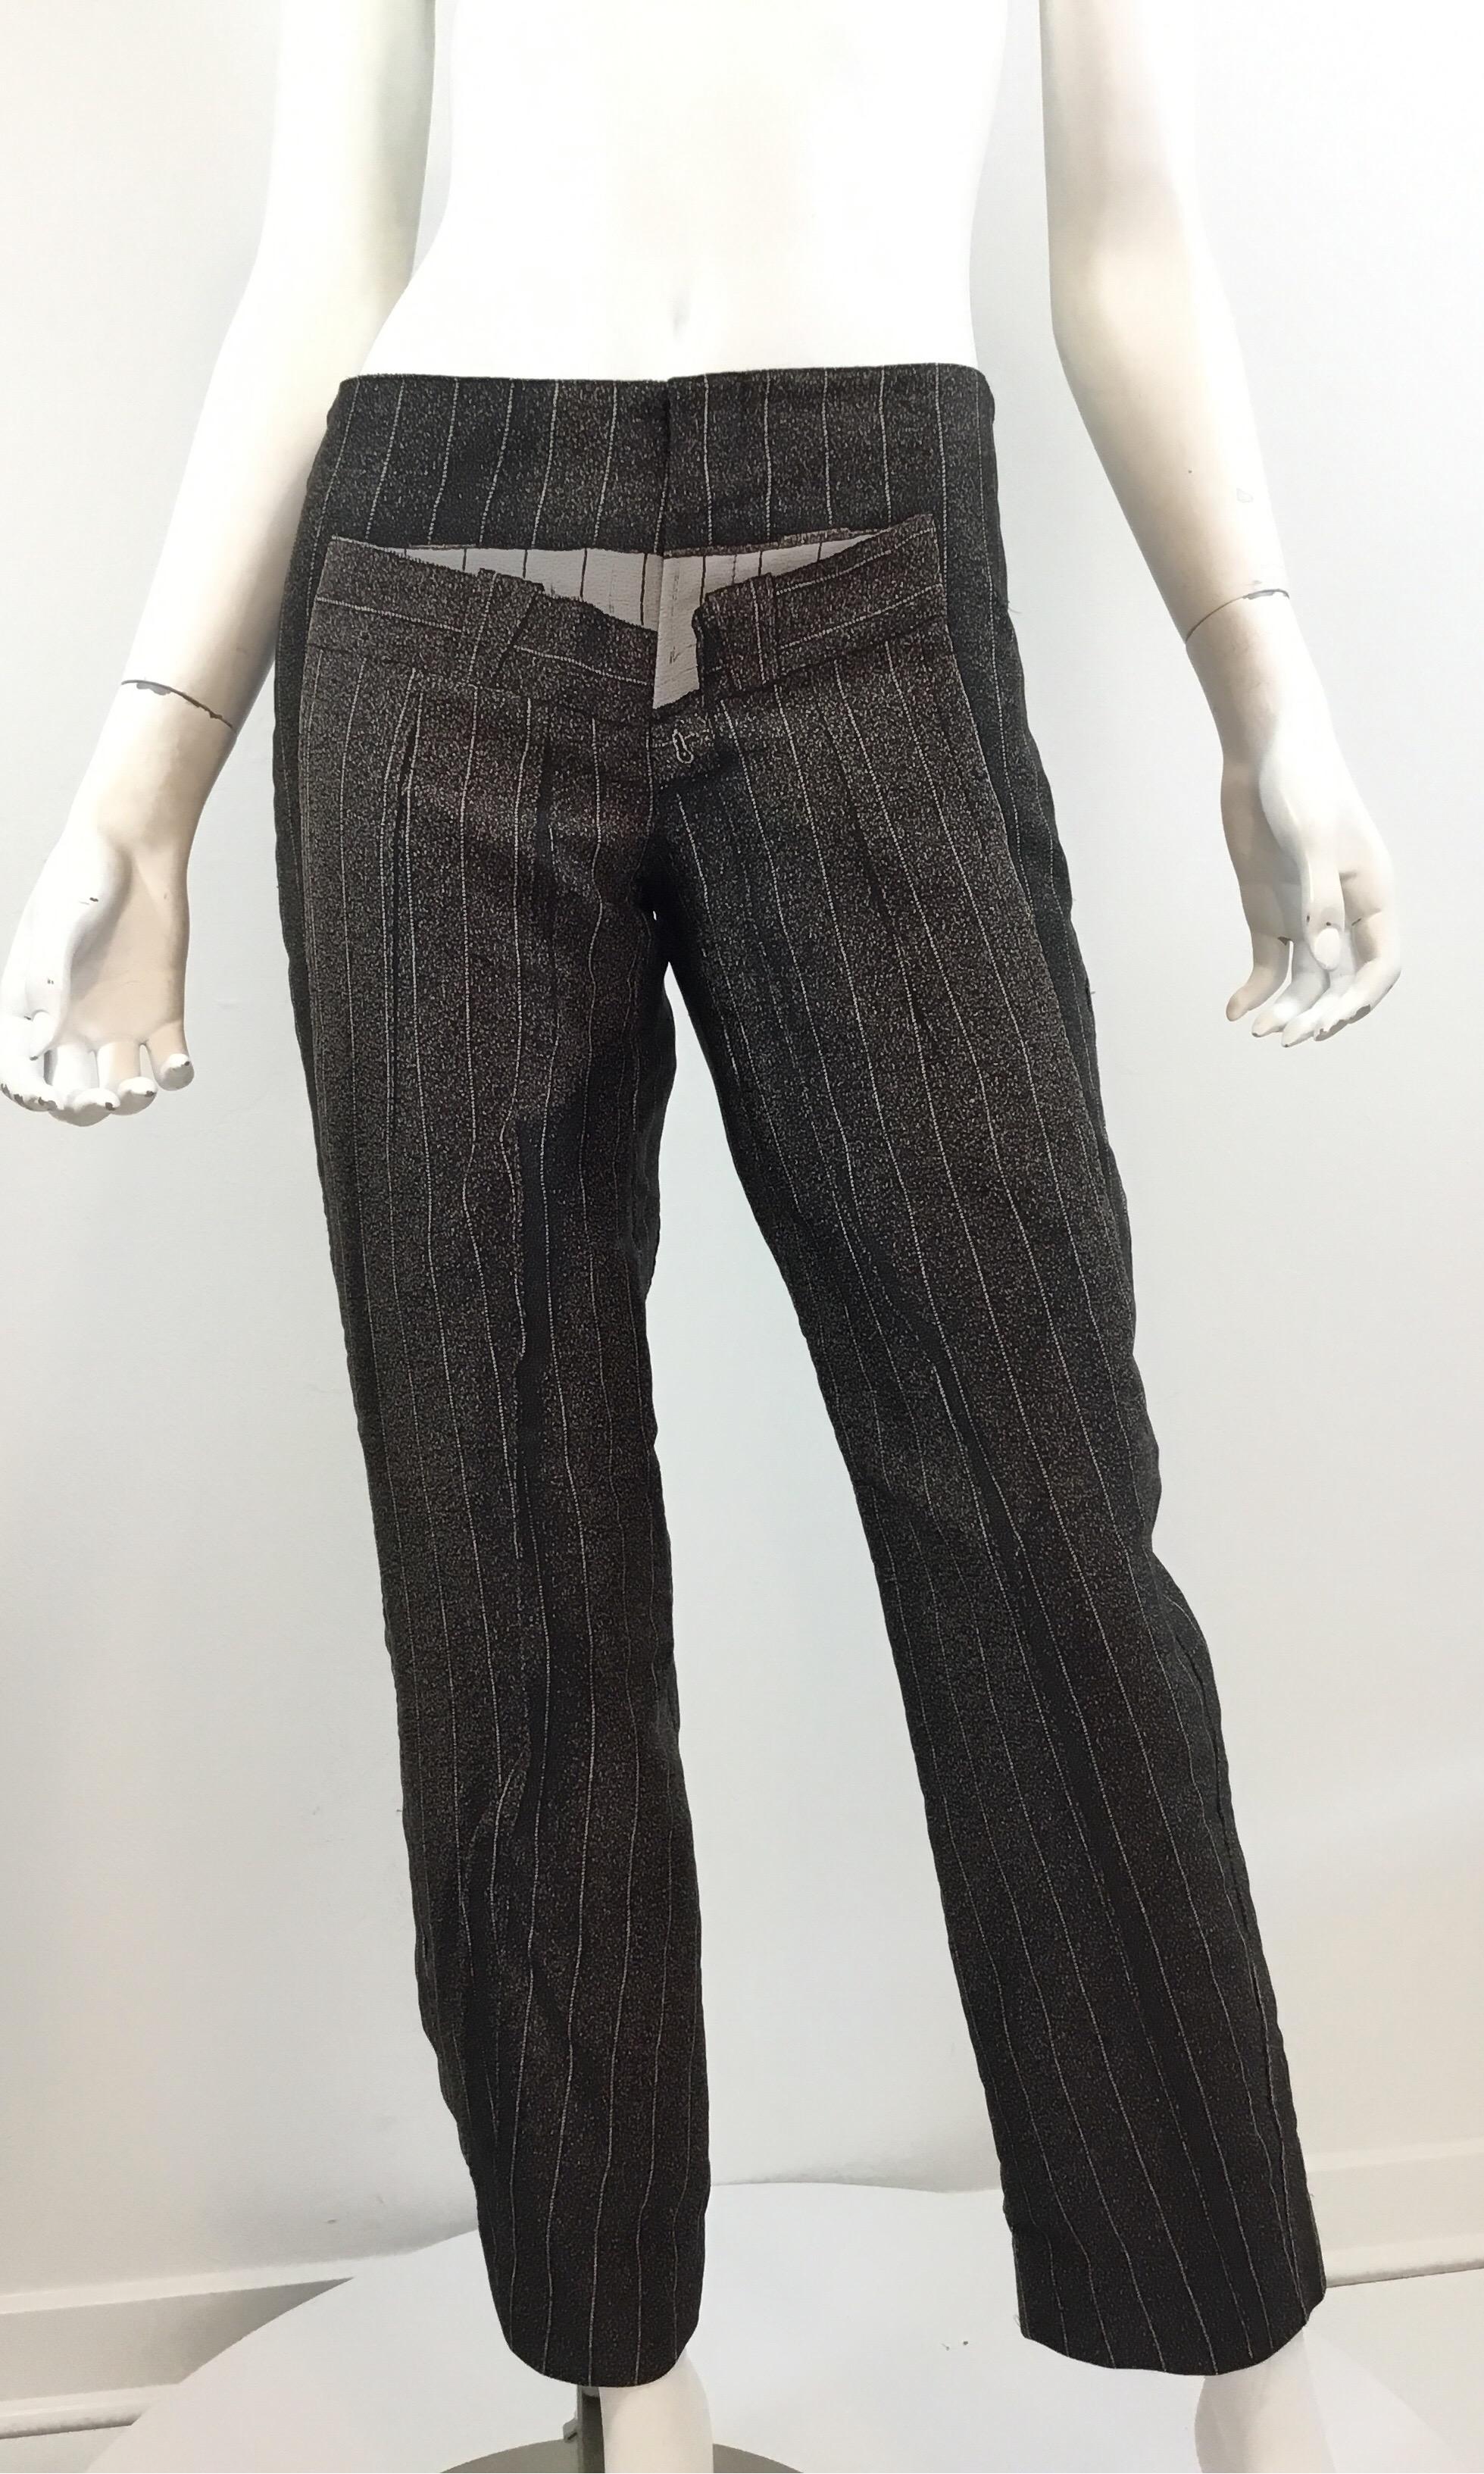 Jean Paul Gaultier pants on pants print design with pinstripes. Pants are a size 6, made in Italy. 100% polyester. 

Waist 30”, hips 36”, inseam 29”, rise 9.5”, length 37”